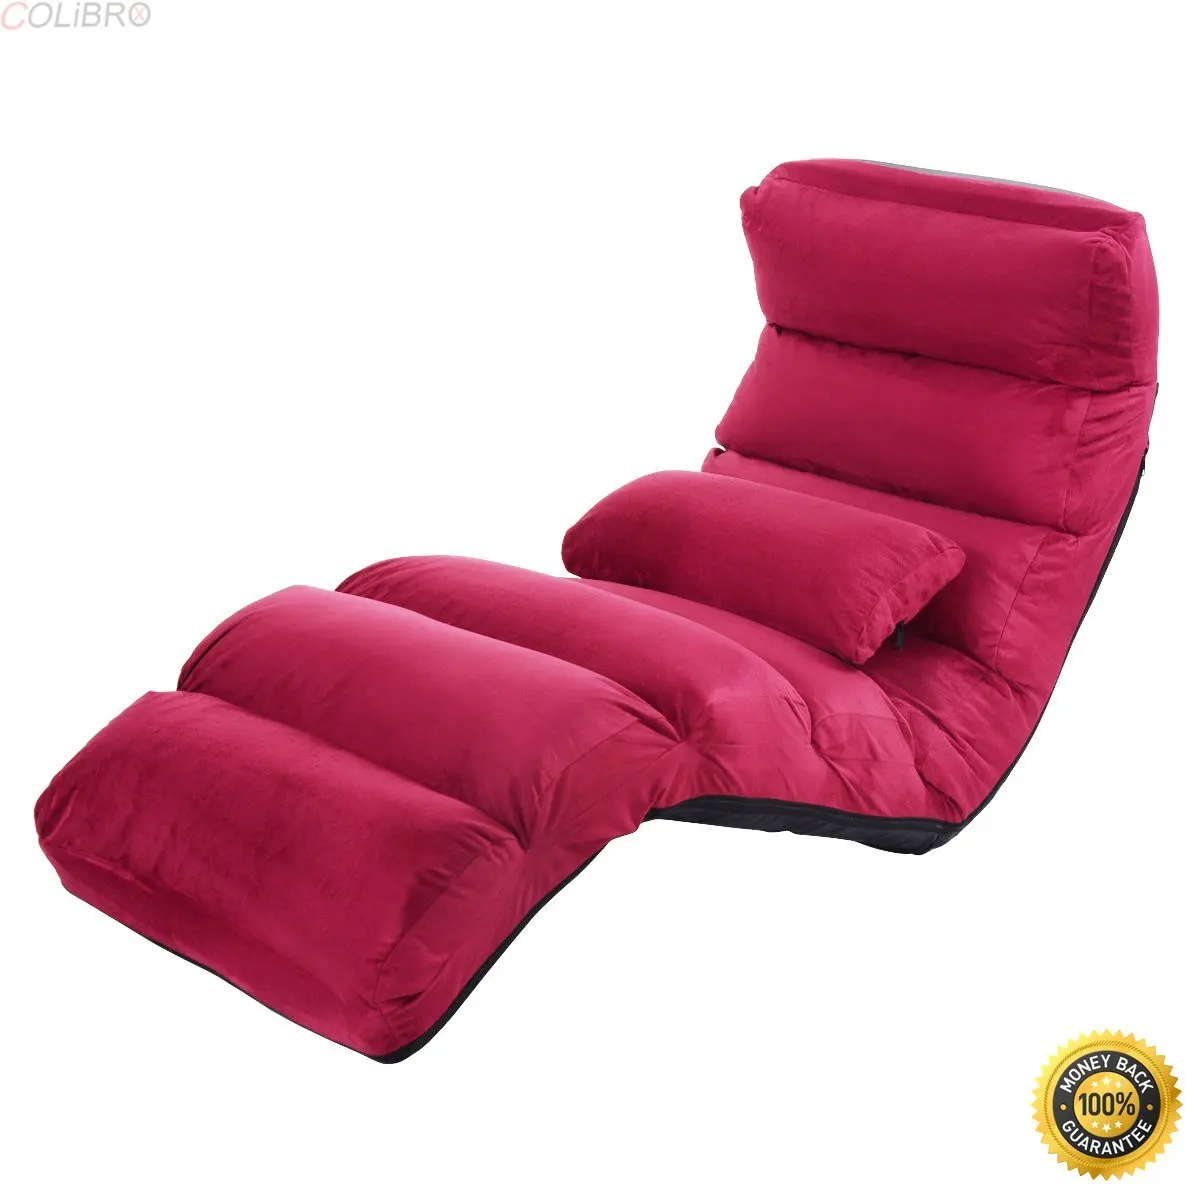 Buy Colibrox Folding Lazy Sofa Chair Stylish Sofa Couch Bed